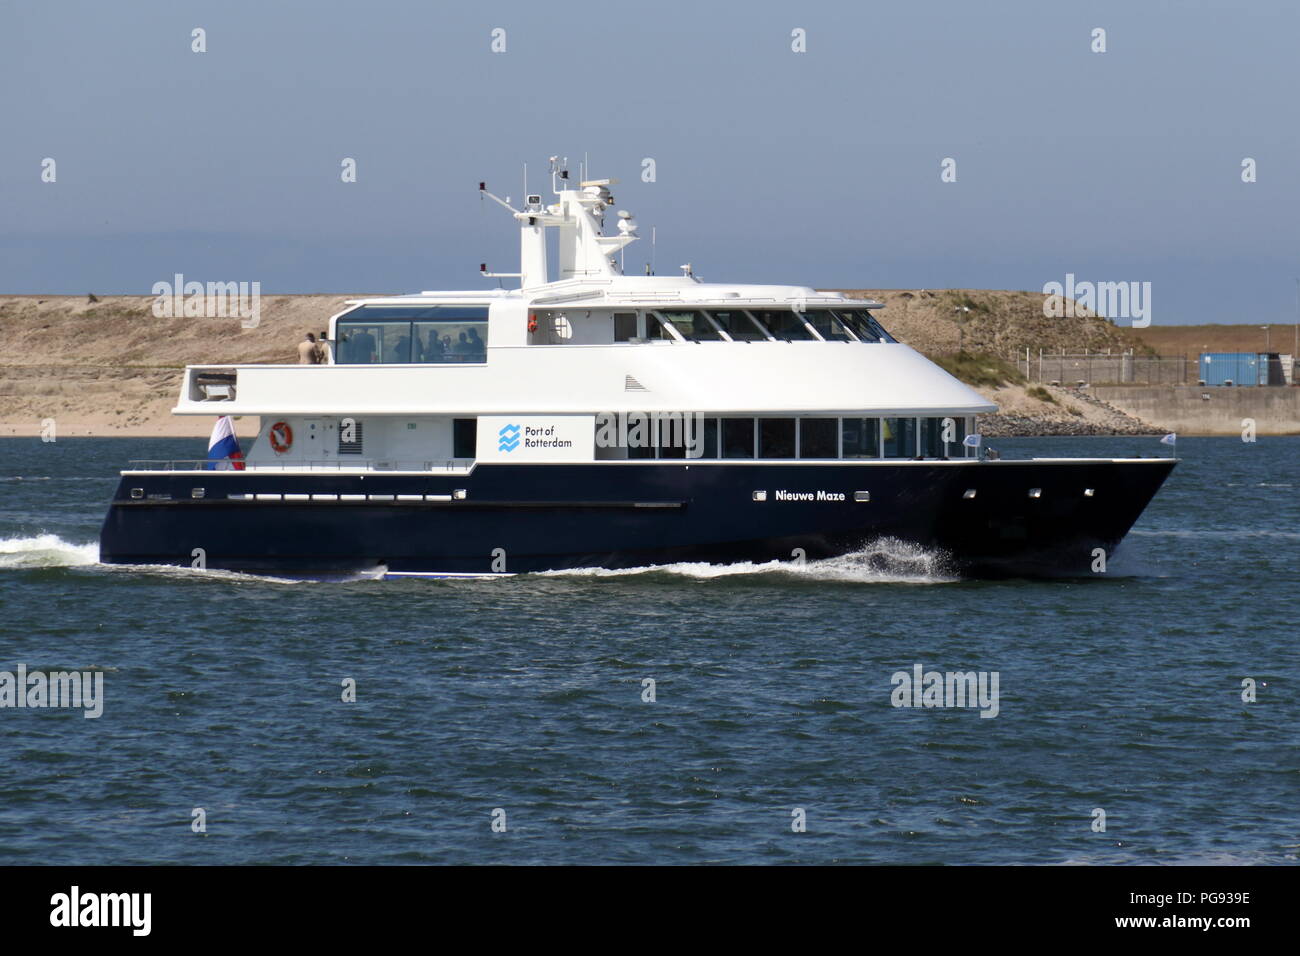 The round trip boat Nieuwe Maze will sail through the port of Rotterdam on July 13, 2018. Stock Photo